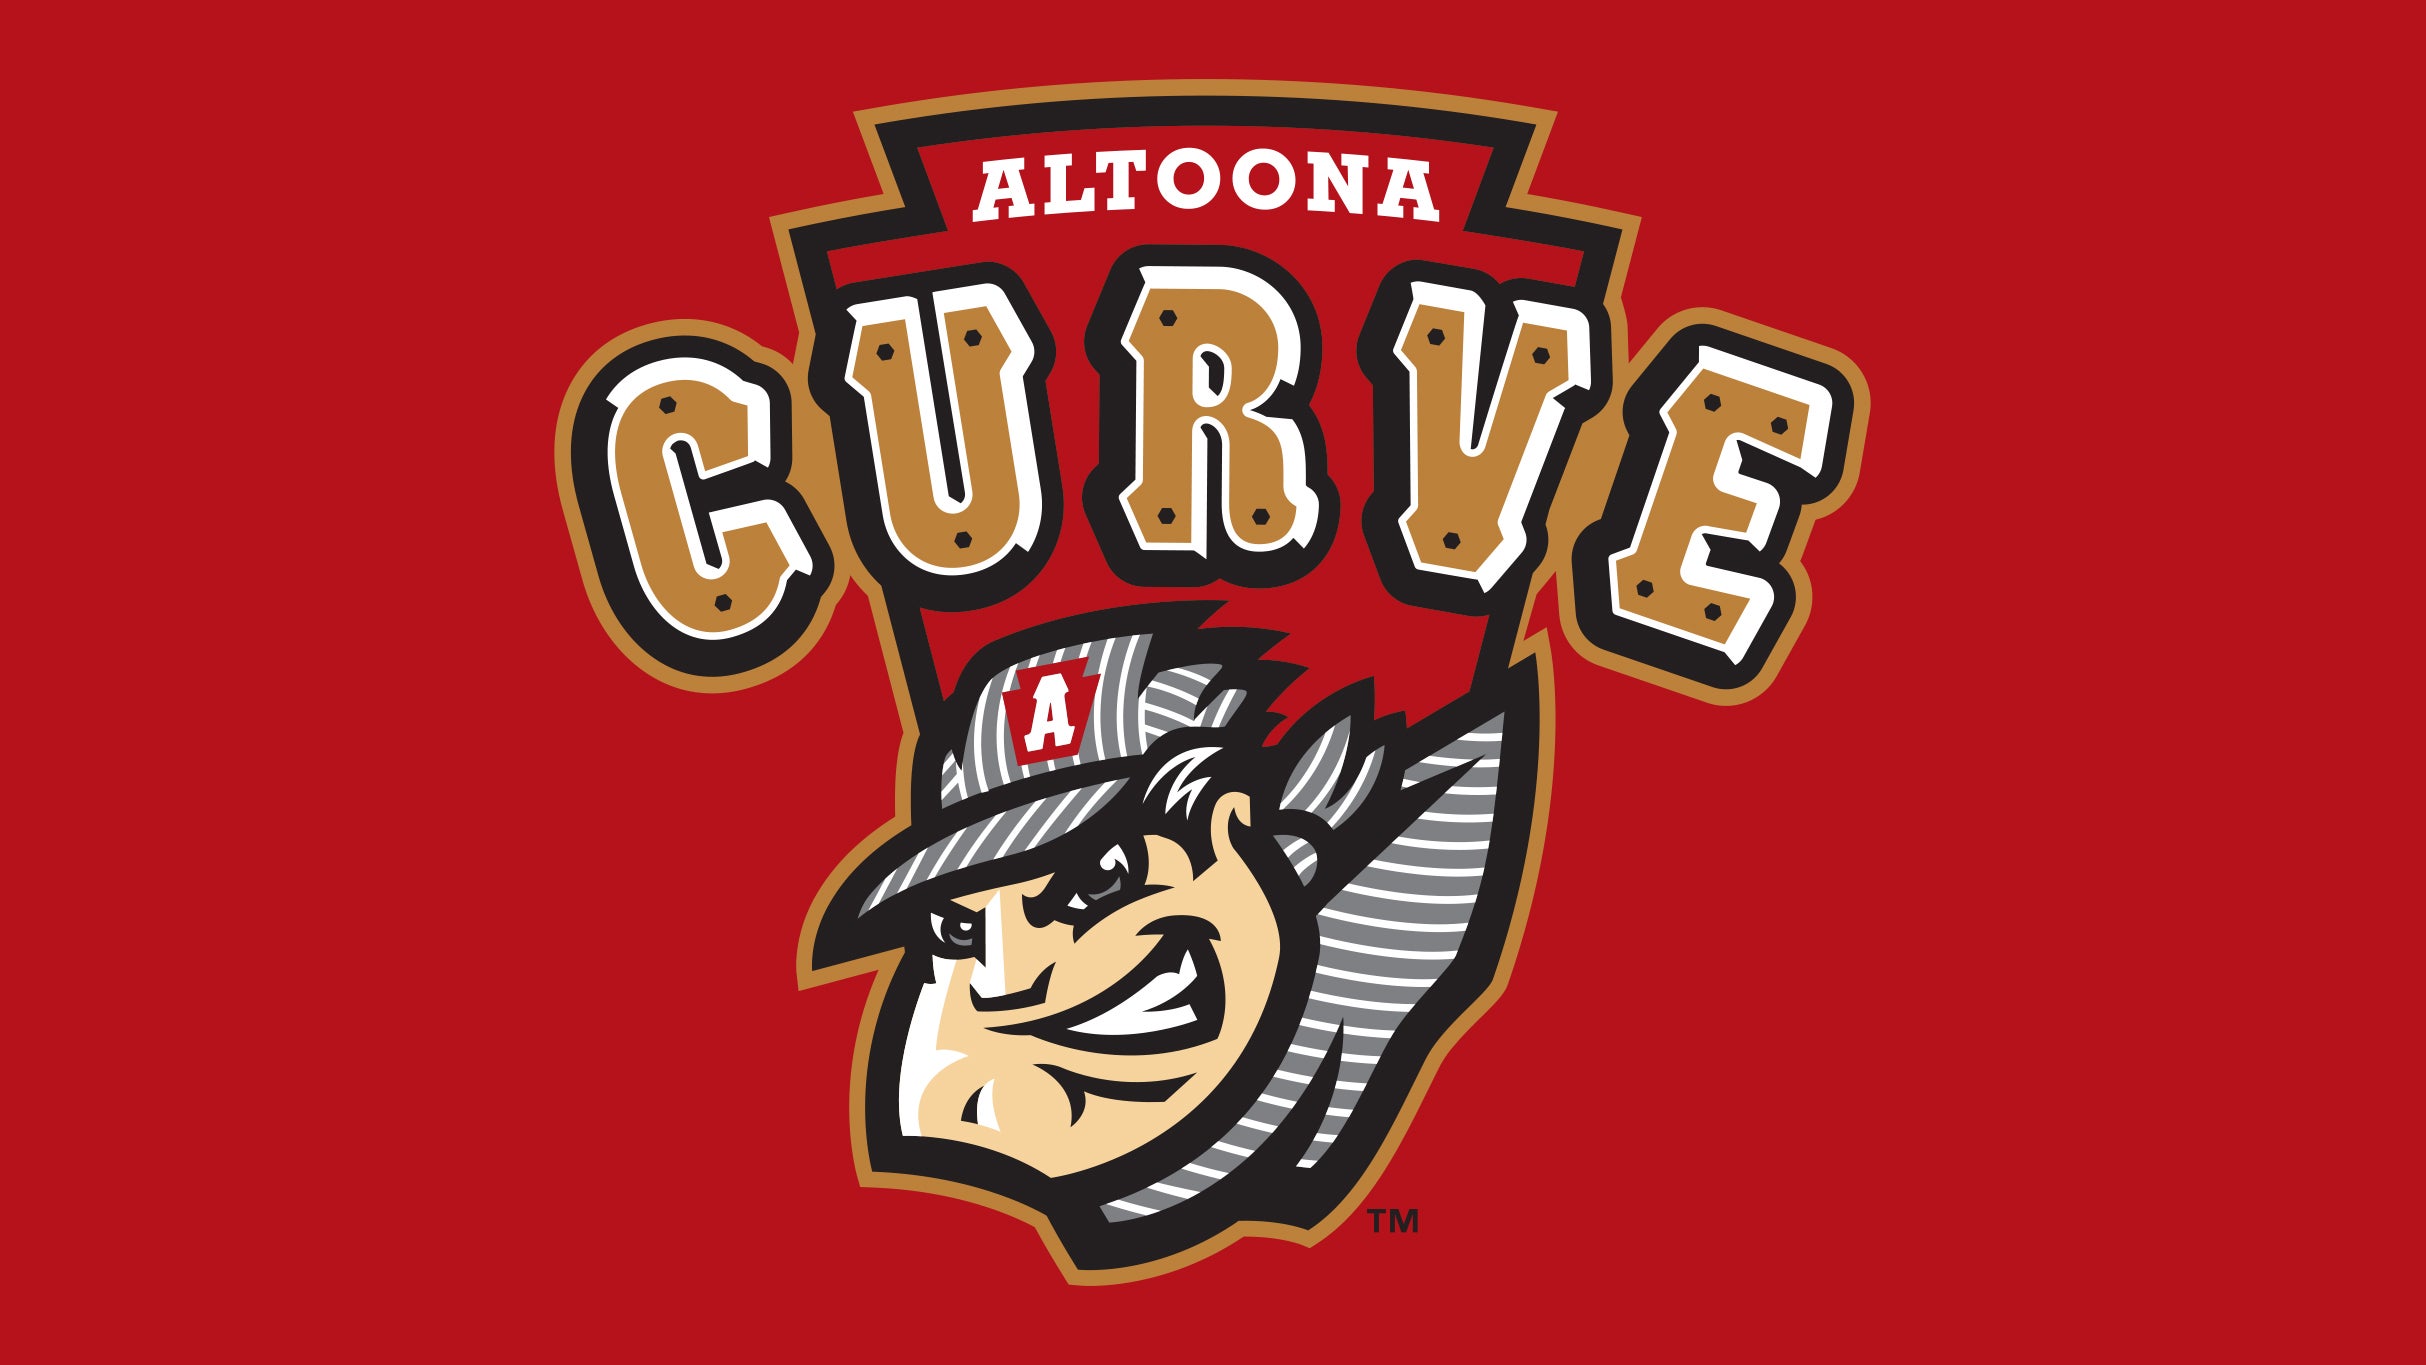 Altoona Curve vs. Bowie Baysox at Peoples Natural Gas Field